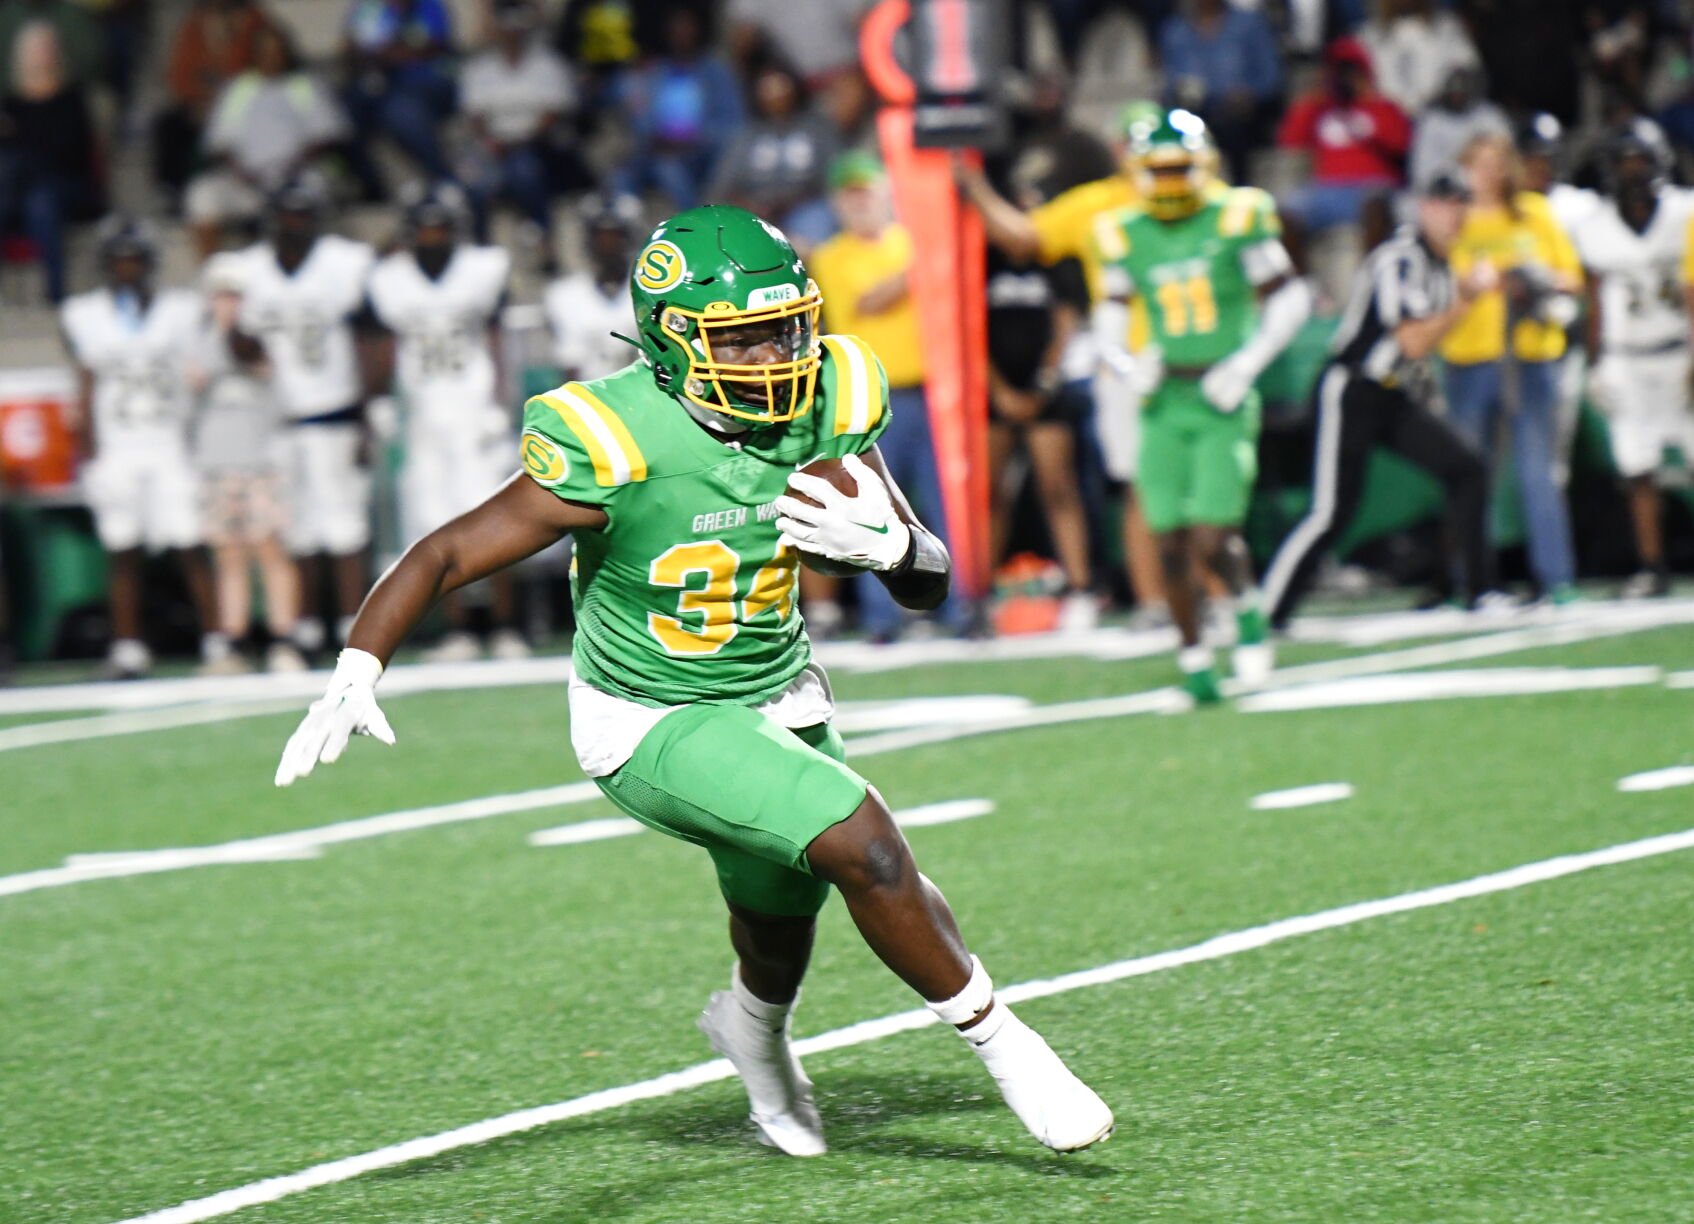 Summerville Green Wave advances to Lower State Finals with Big Win